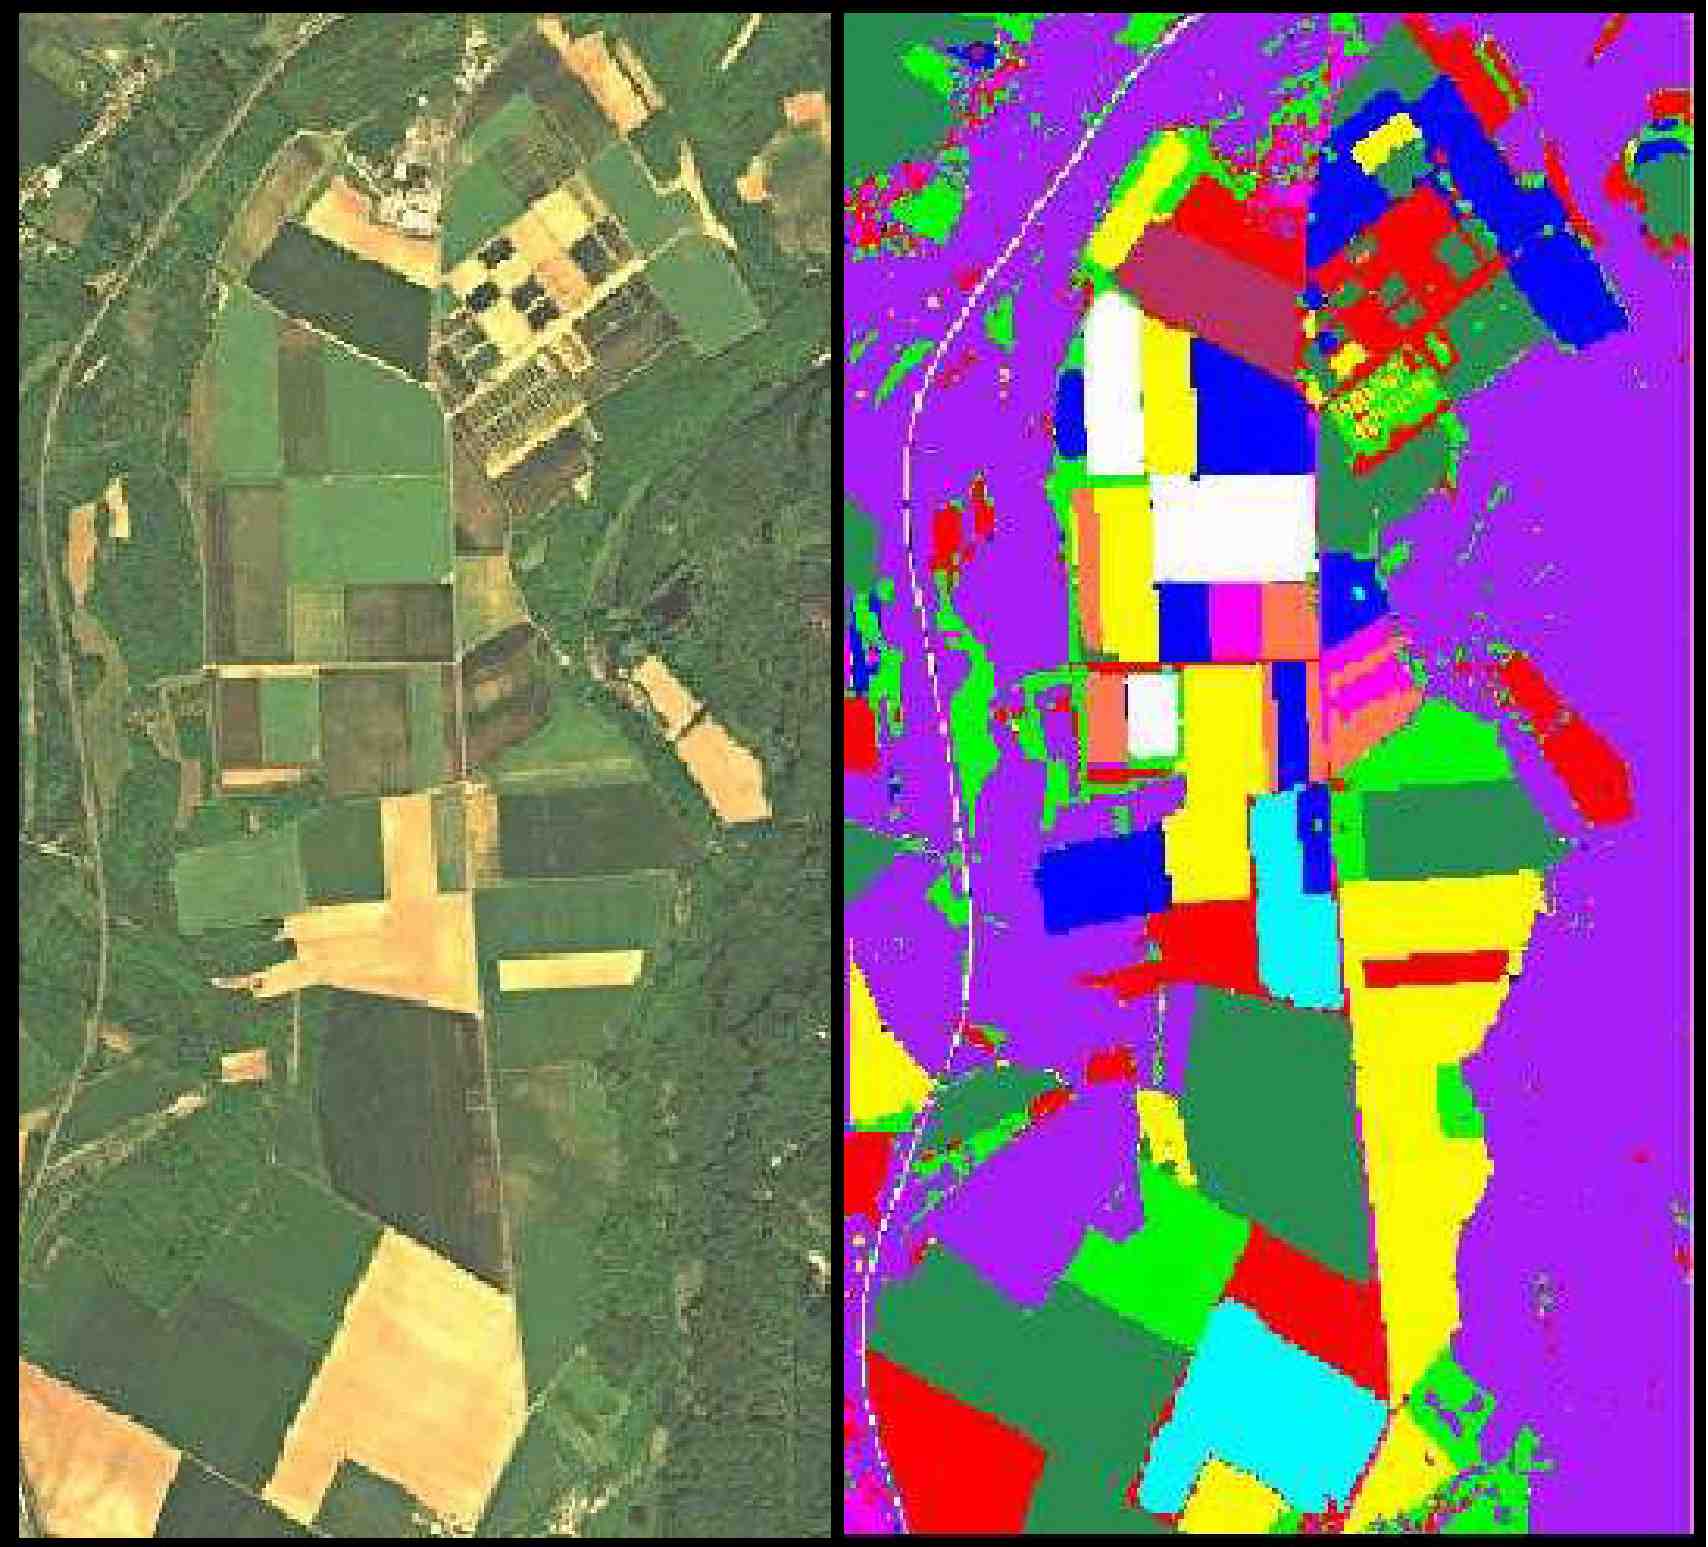 Examples of past ARIANA projects: Agricultural and  peri-urban areas classification result, using Markov random fields from a hyperspectral image. Left: å© Astrium/EADS. Right: å©  INRIA/ARIANA